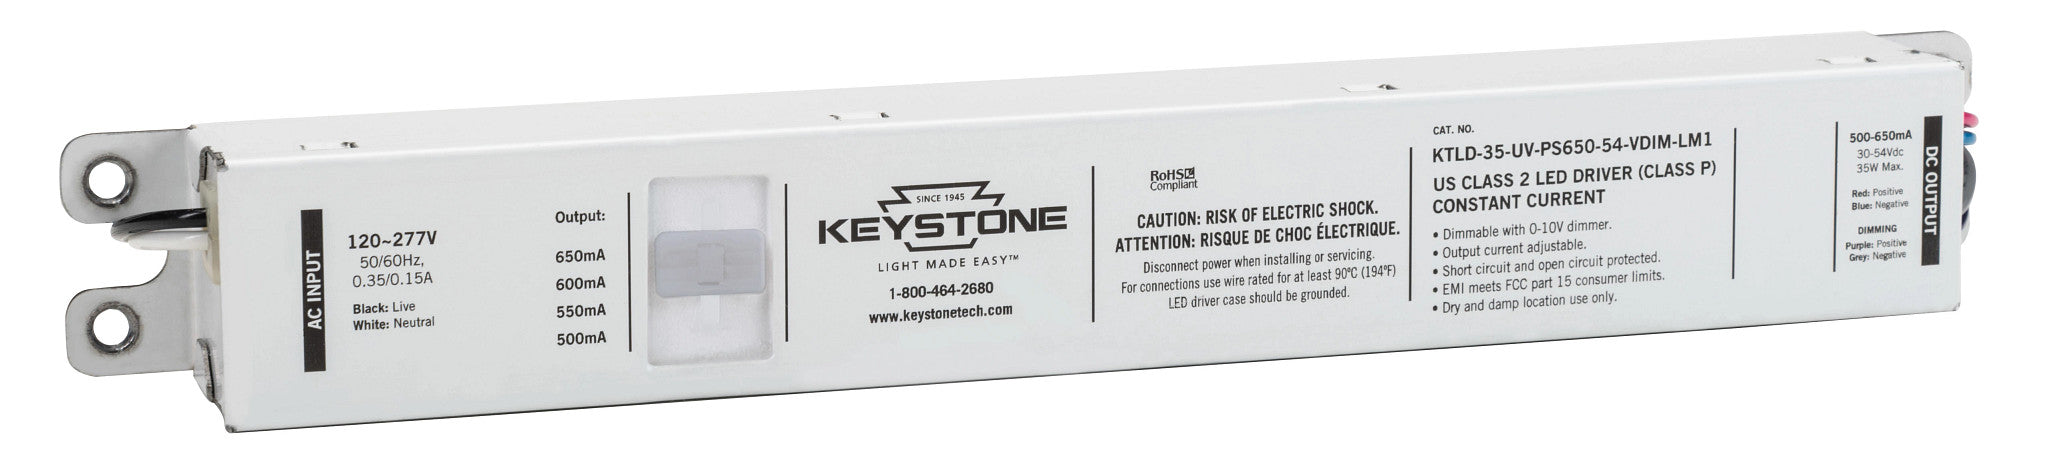 Keystone LED Driver 35W Selectable Output Currents Include 500Ma 650Ma 30-54VDC Output Voltage 0-10V Dimming (KTLD-35-UV-PS650-54-VDIM-LM1)